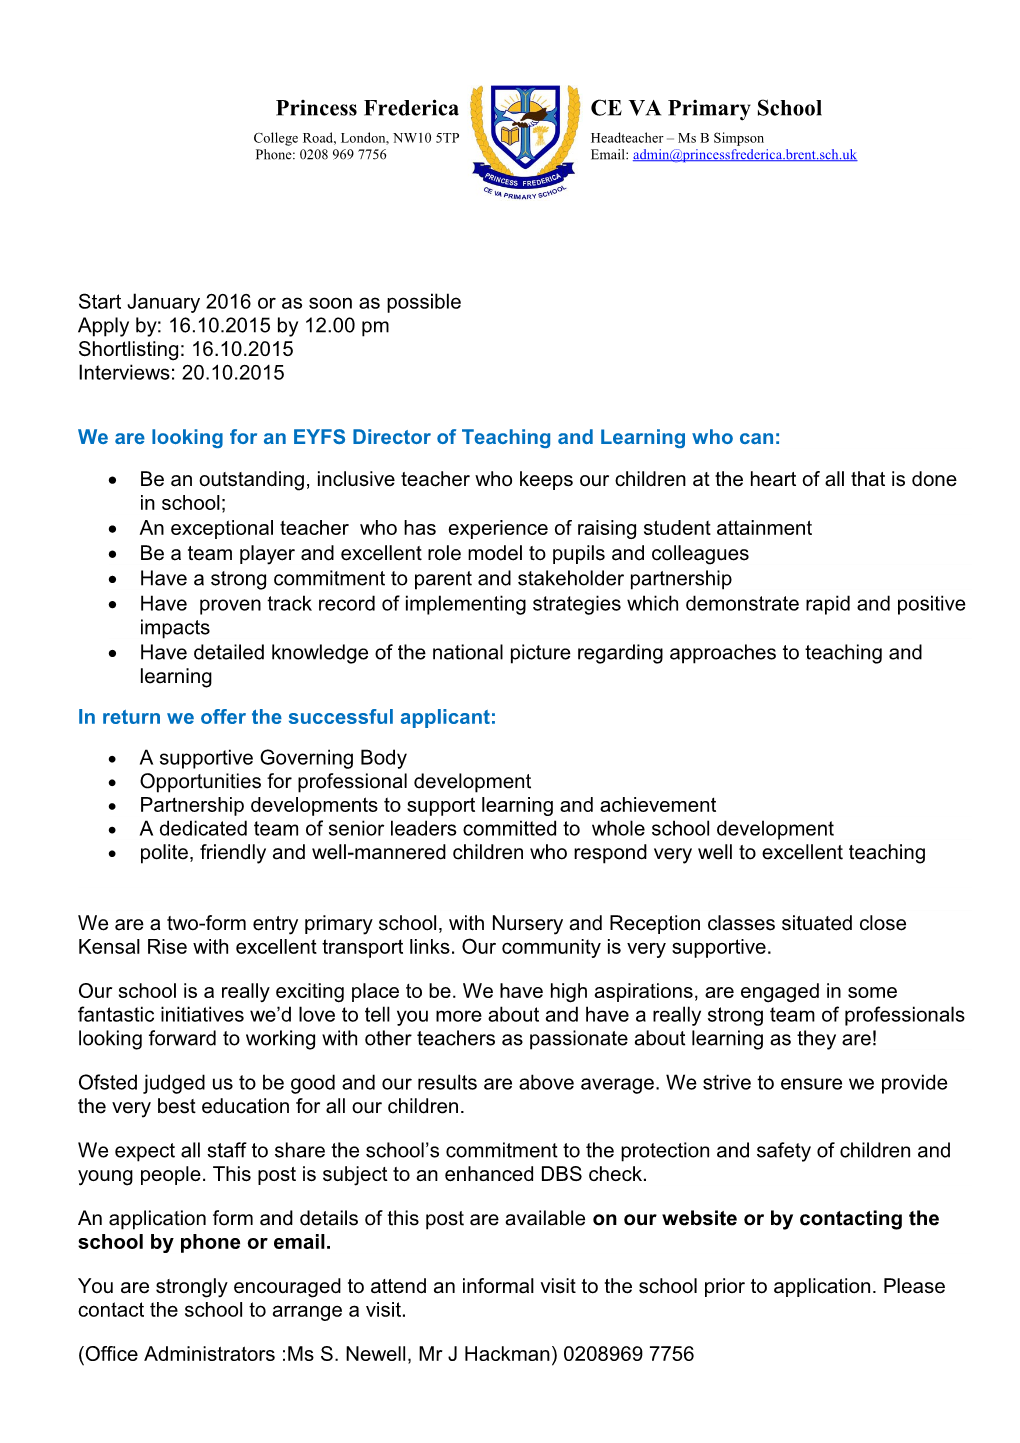 We Are Looking for an EYFS Director of Teaching and Learning Who Can